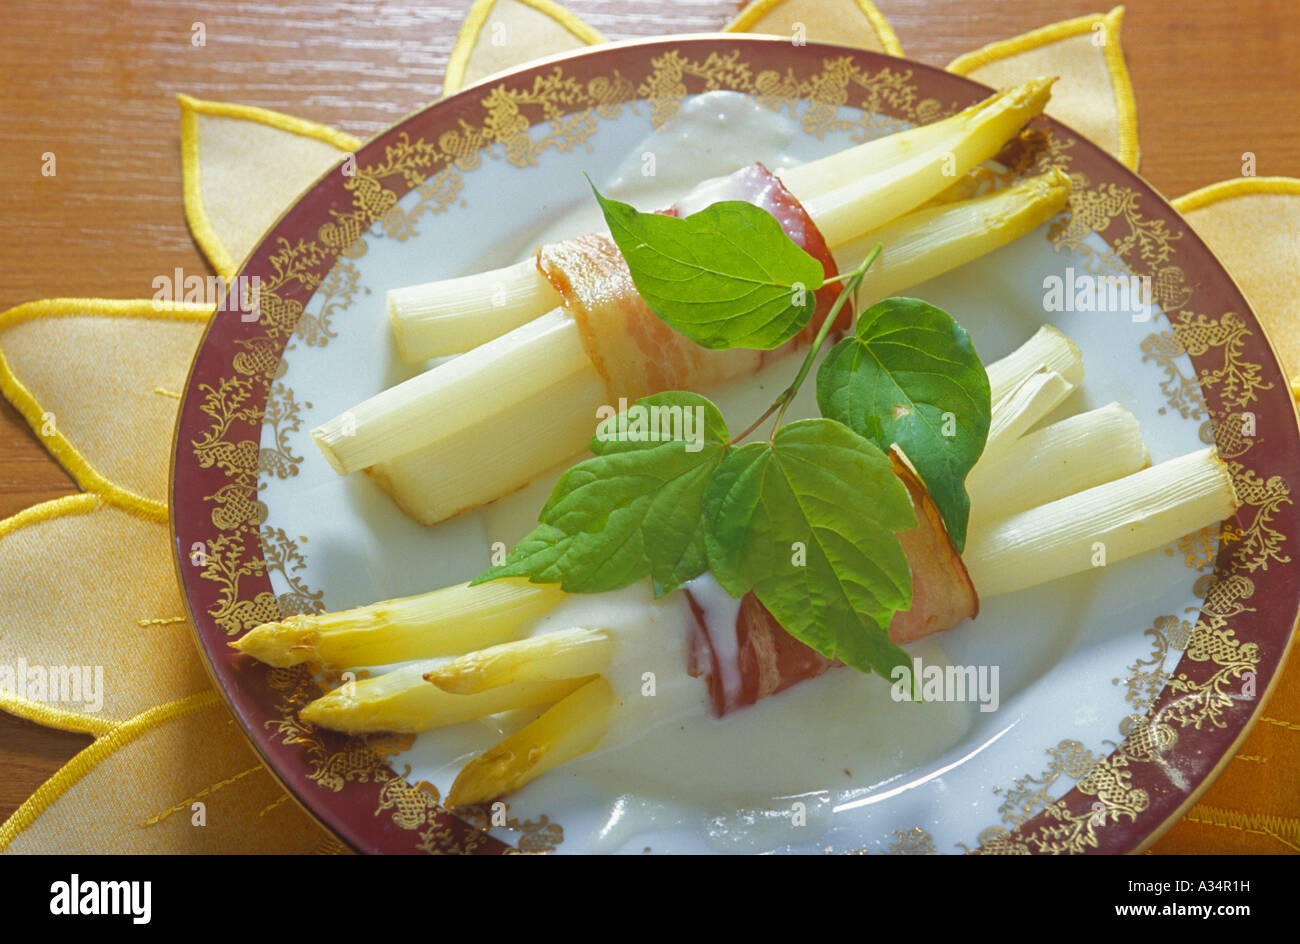 Spargel mit Schinken, Asparagus Meal on Plate White Asparagus with Ham Stock Photo